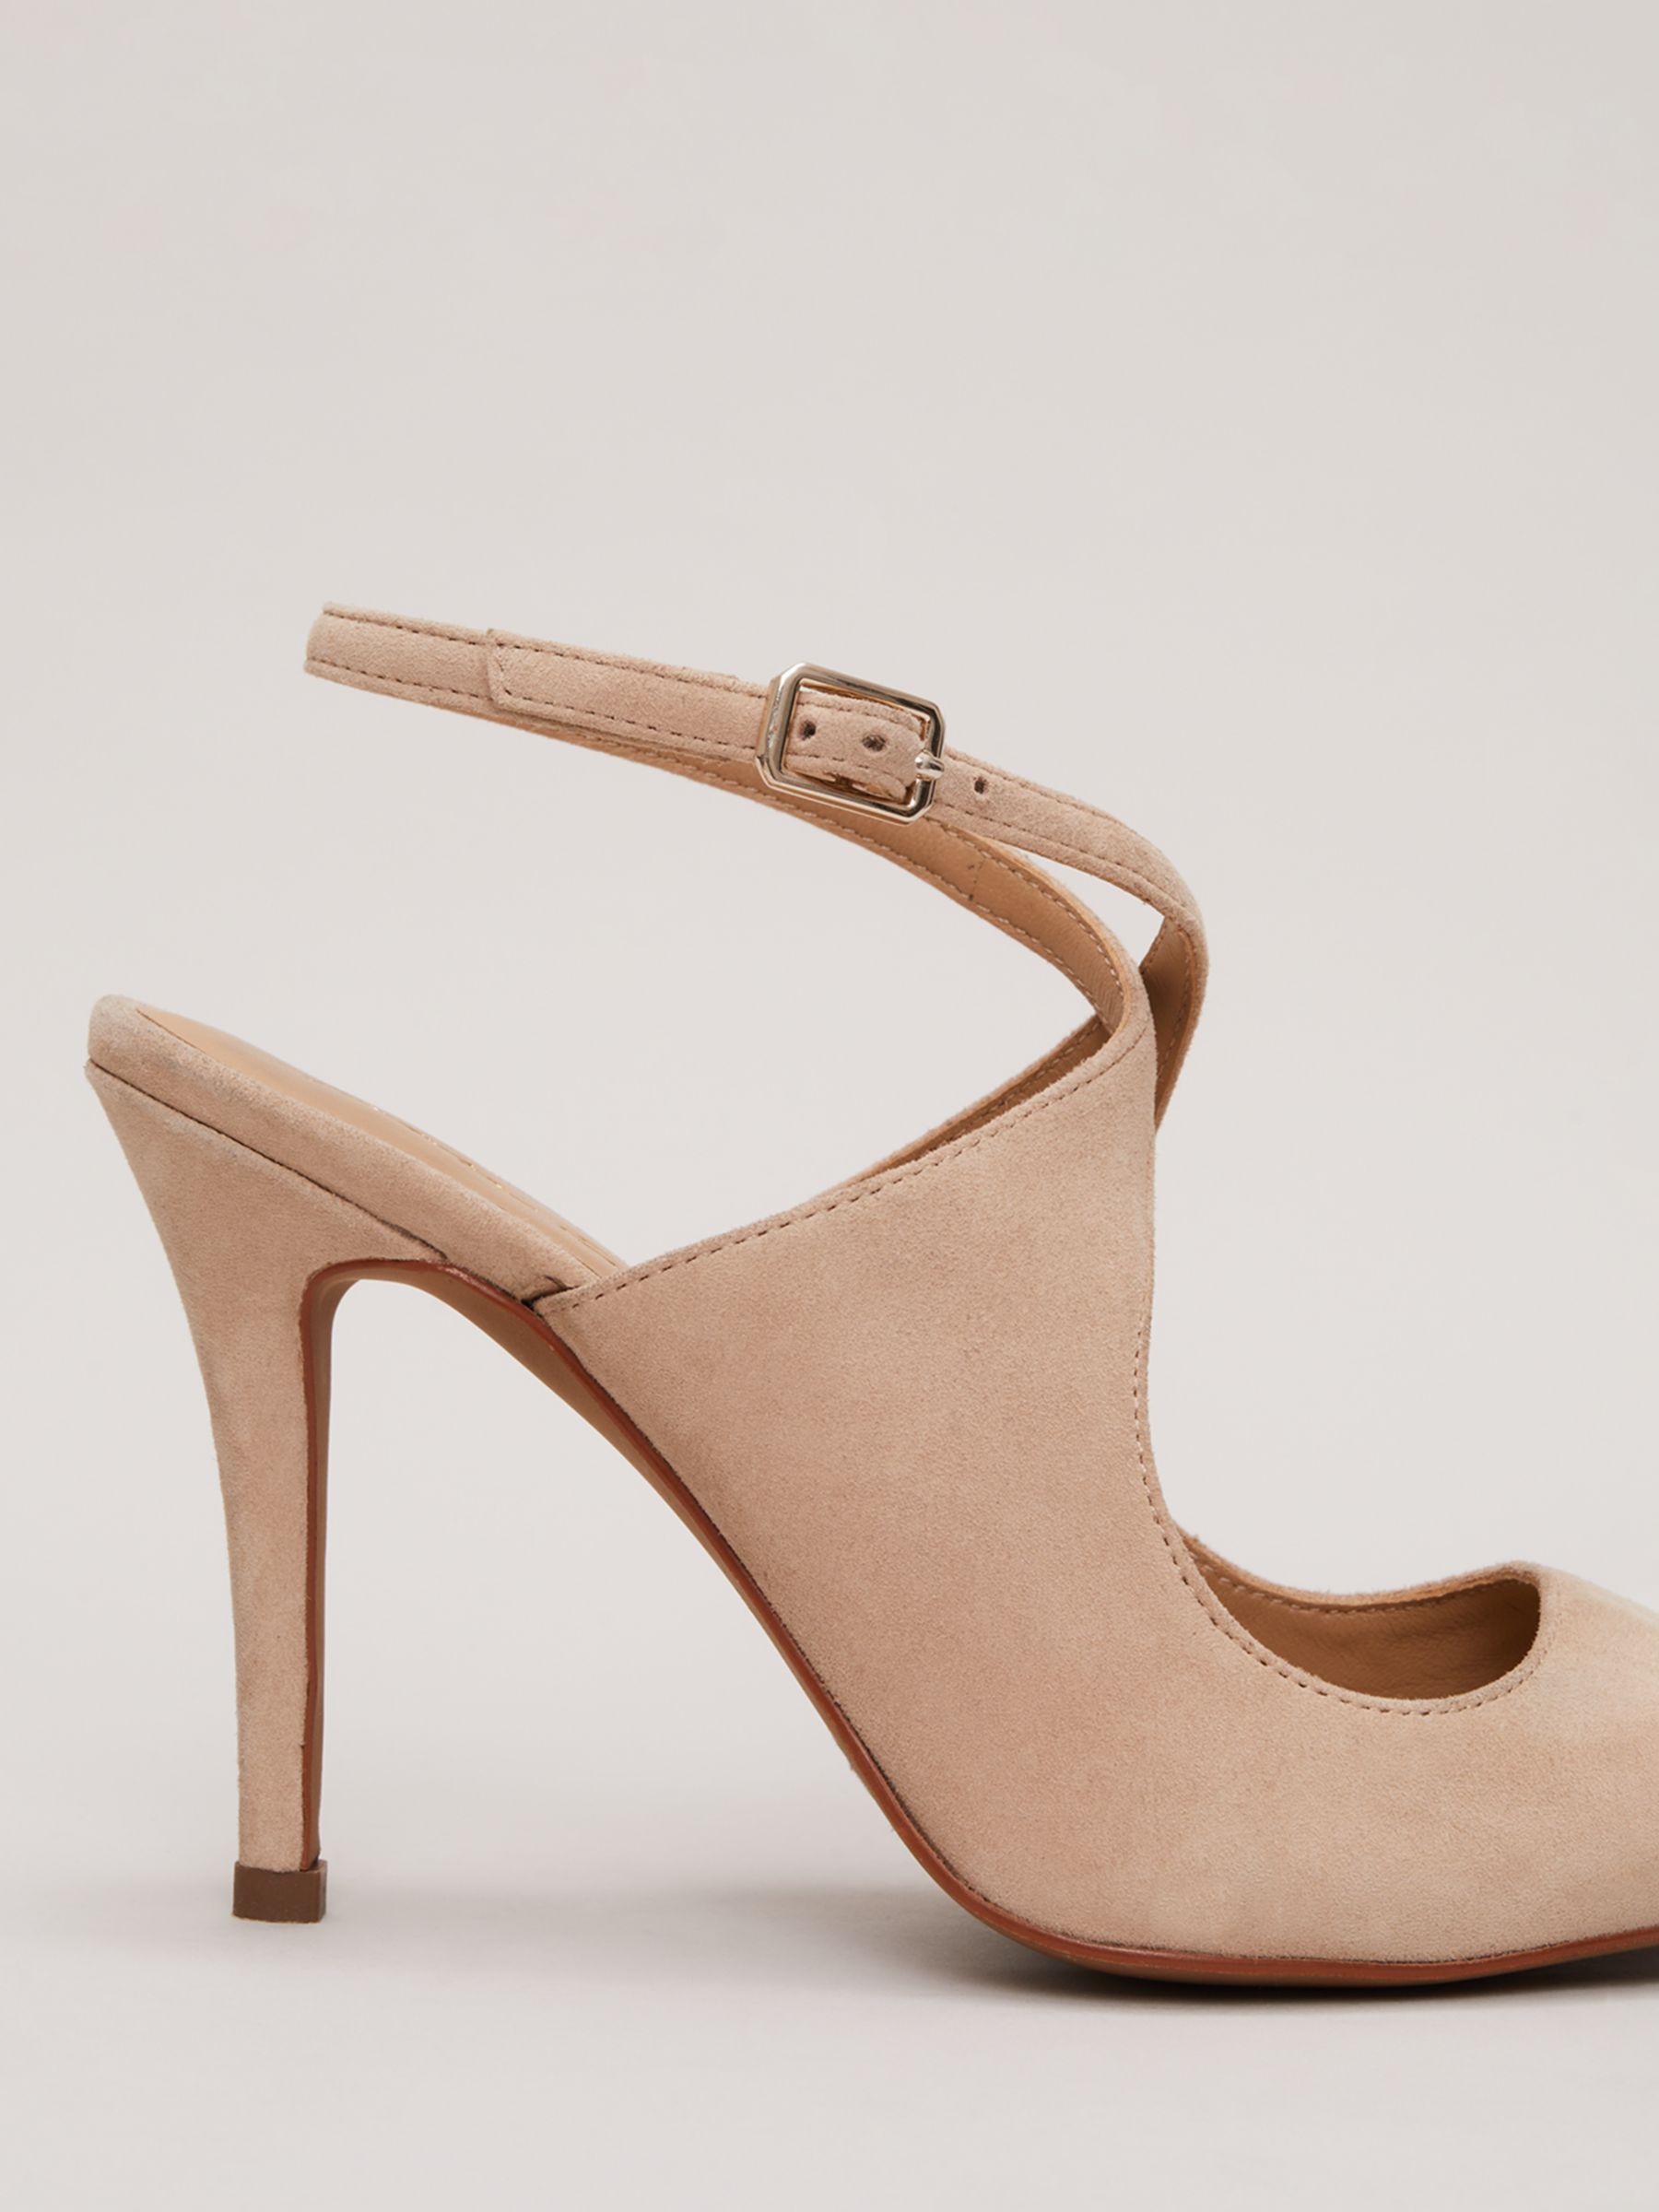 Buy Phase Eight Suede Cross Ankle Strap High Heel Shoes, Neutral Online at johnlewis.com